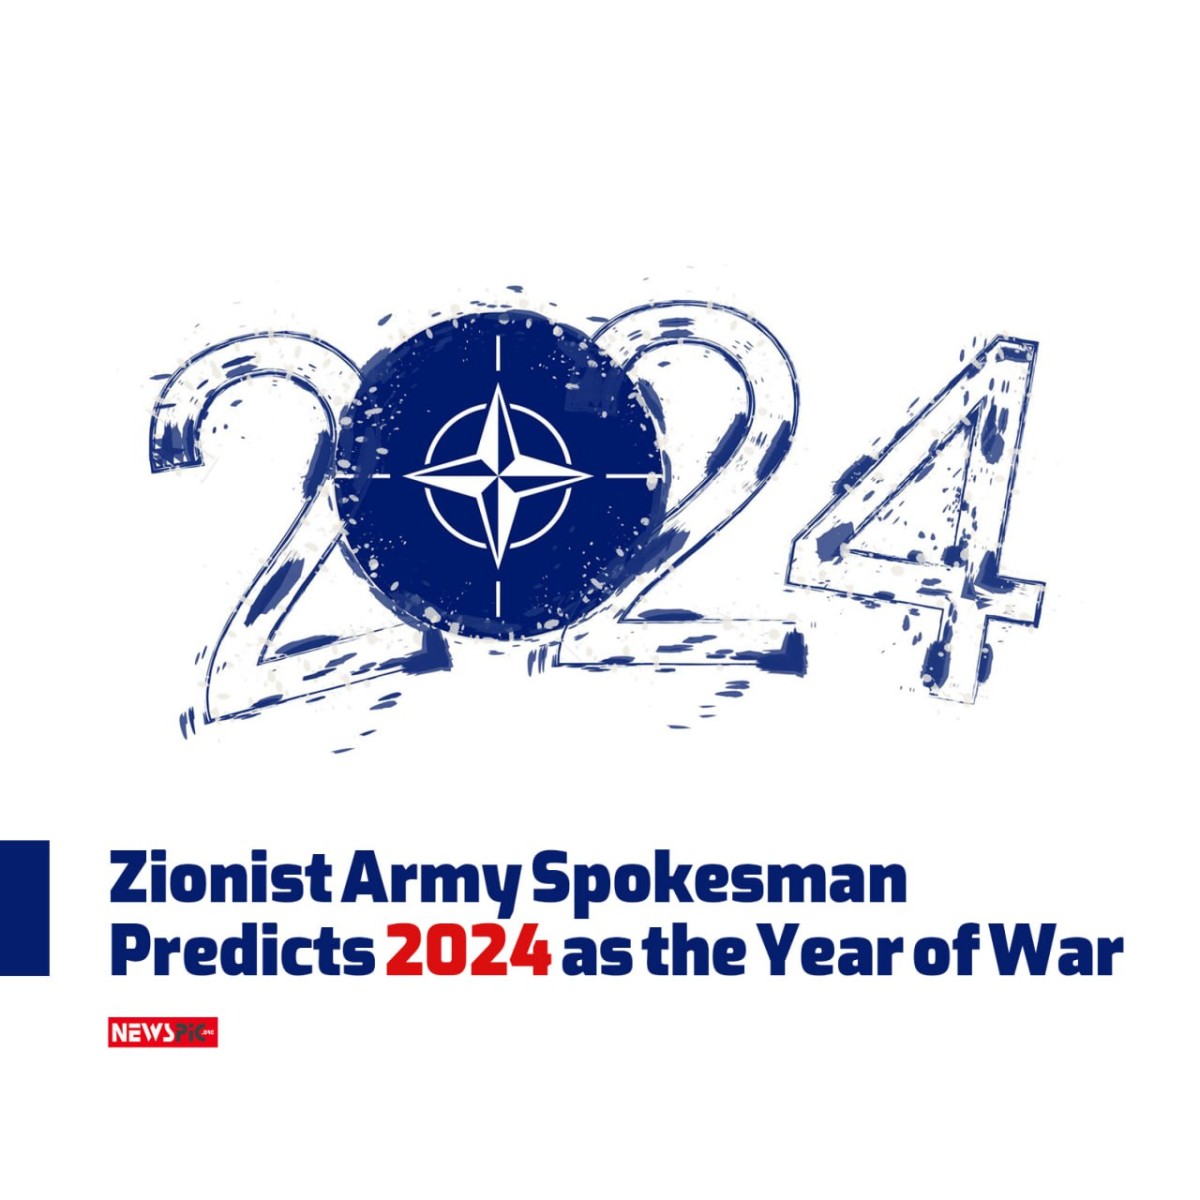 Zionist Army Spokesman Predicts 2024 as the Year of War